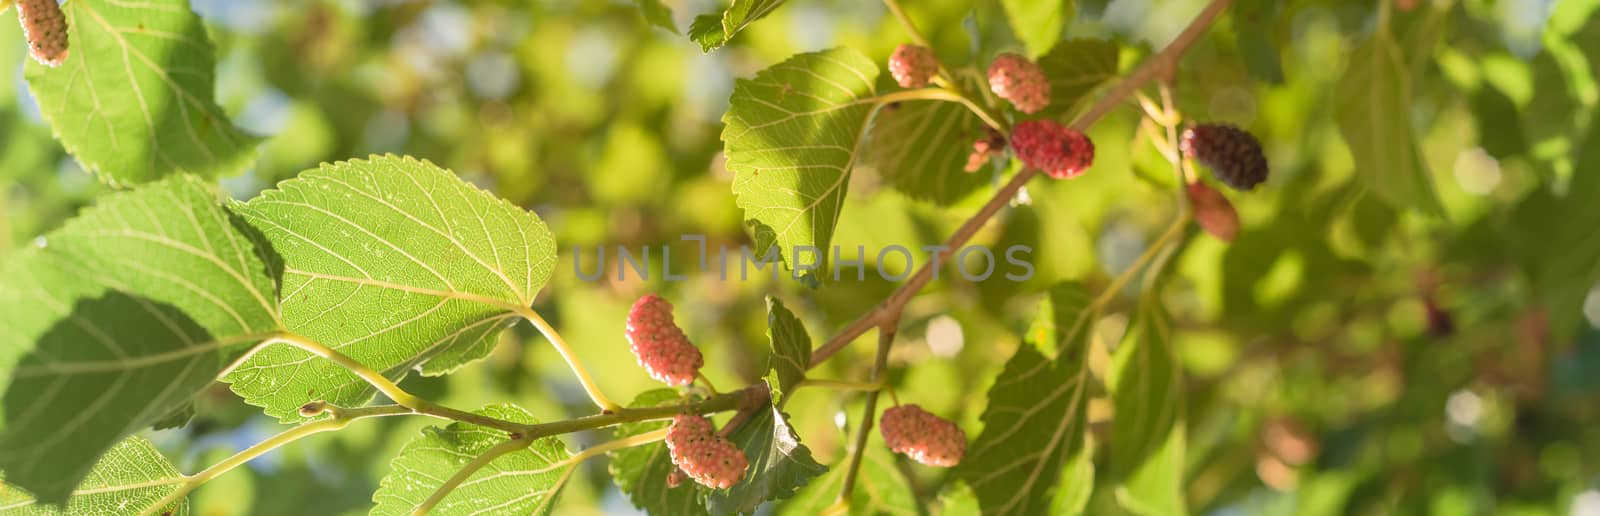 Panoramic ripe mulberry fruits on tree ready to harvest in Texas, USA by trongnguyen